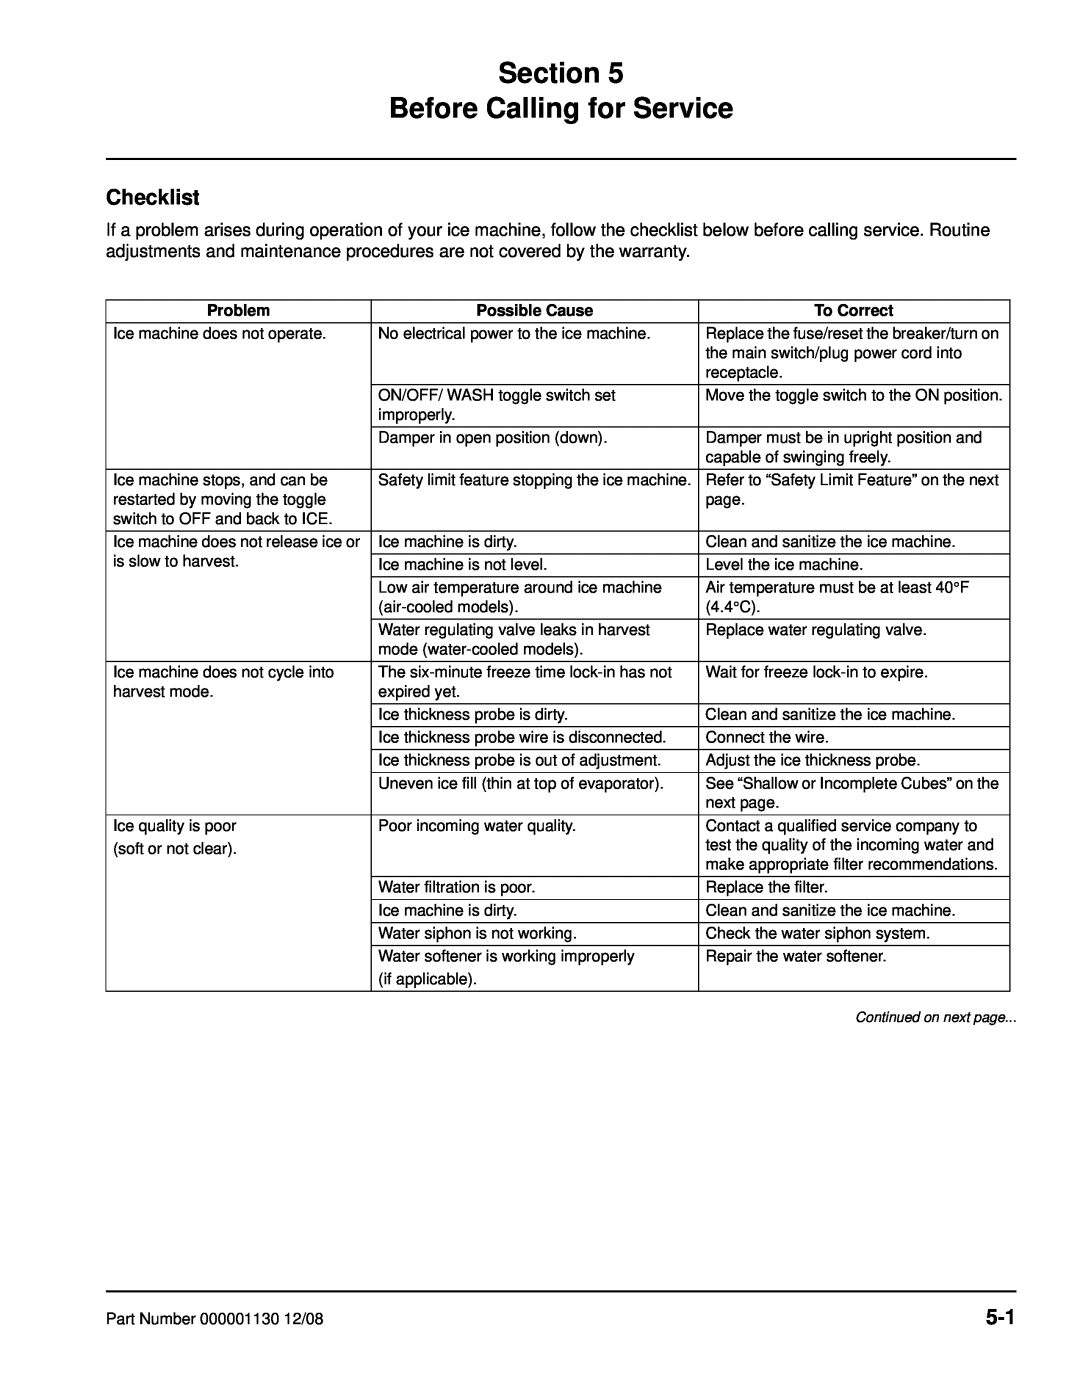 Manitowoc Ice Q130 manual Section Before Calling for Service, Checklist 